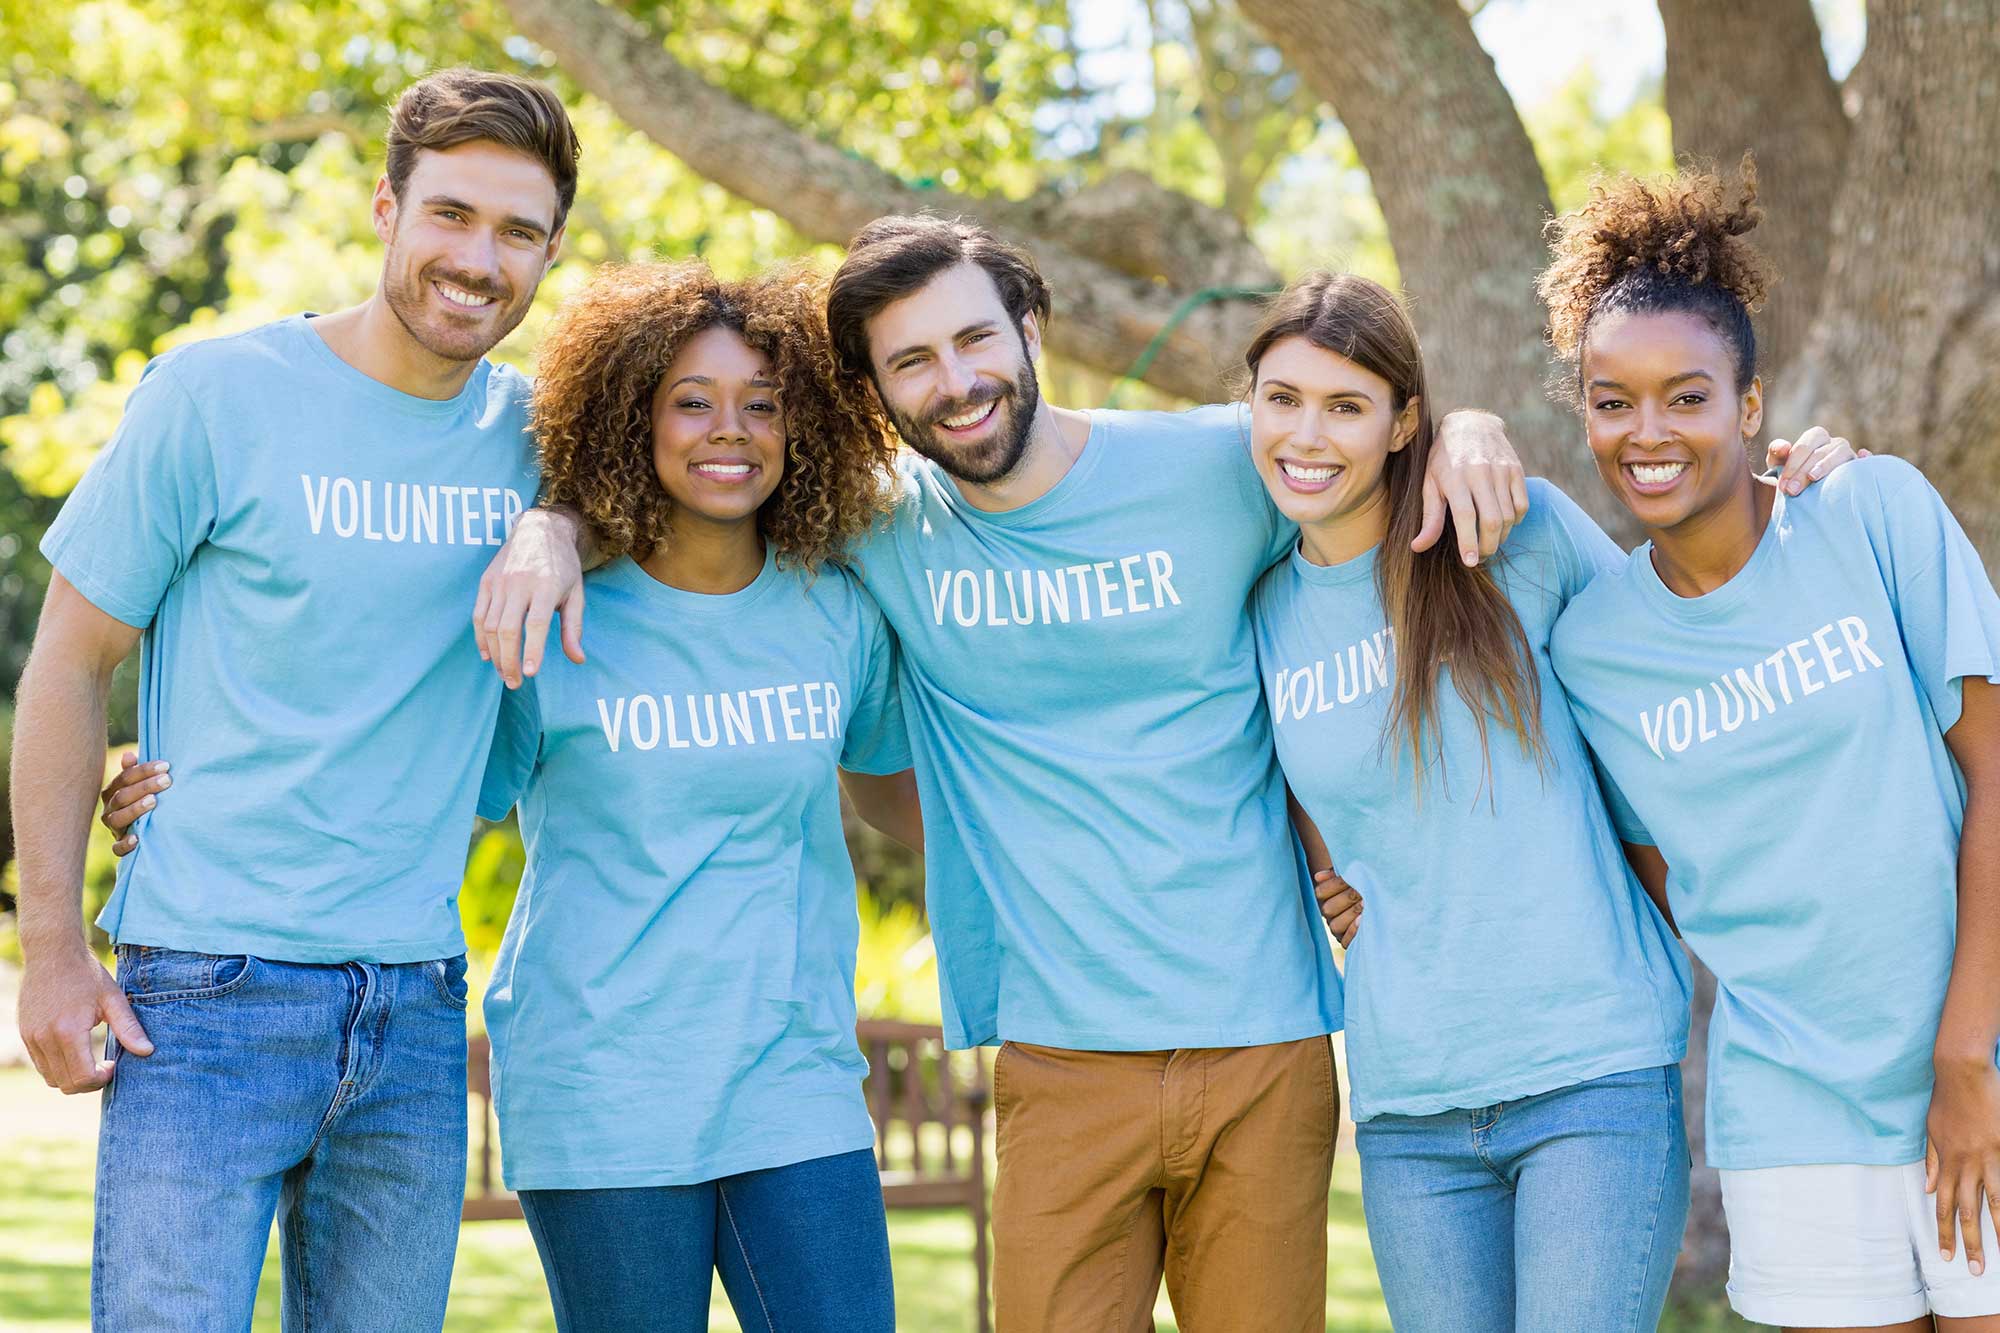 How Would an Employee Volunteer Program Benefit Your Company?